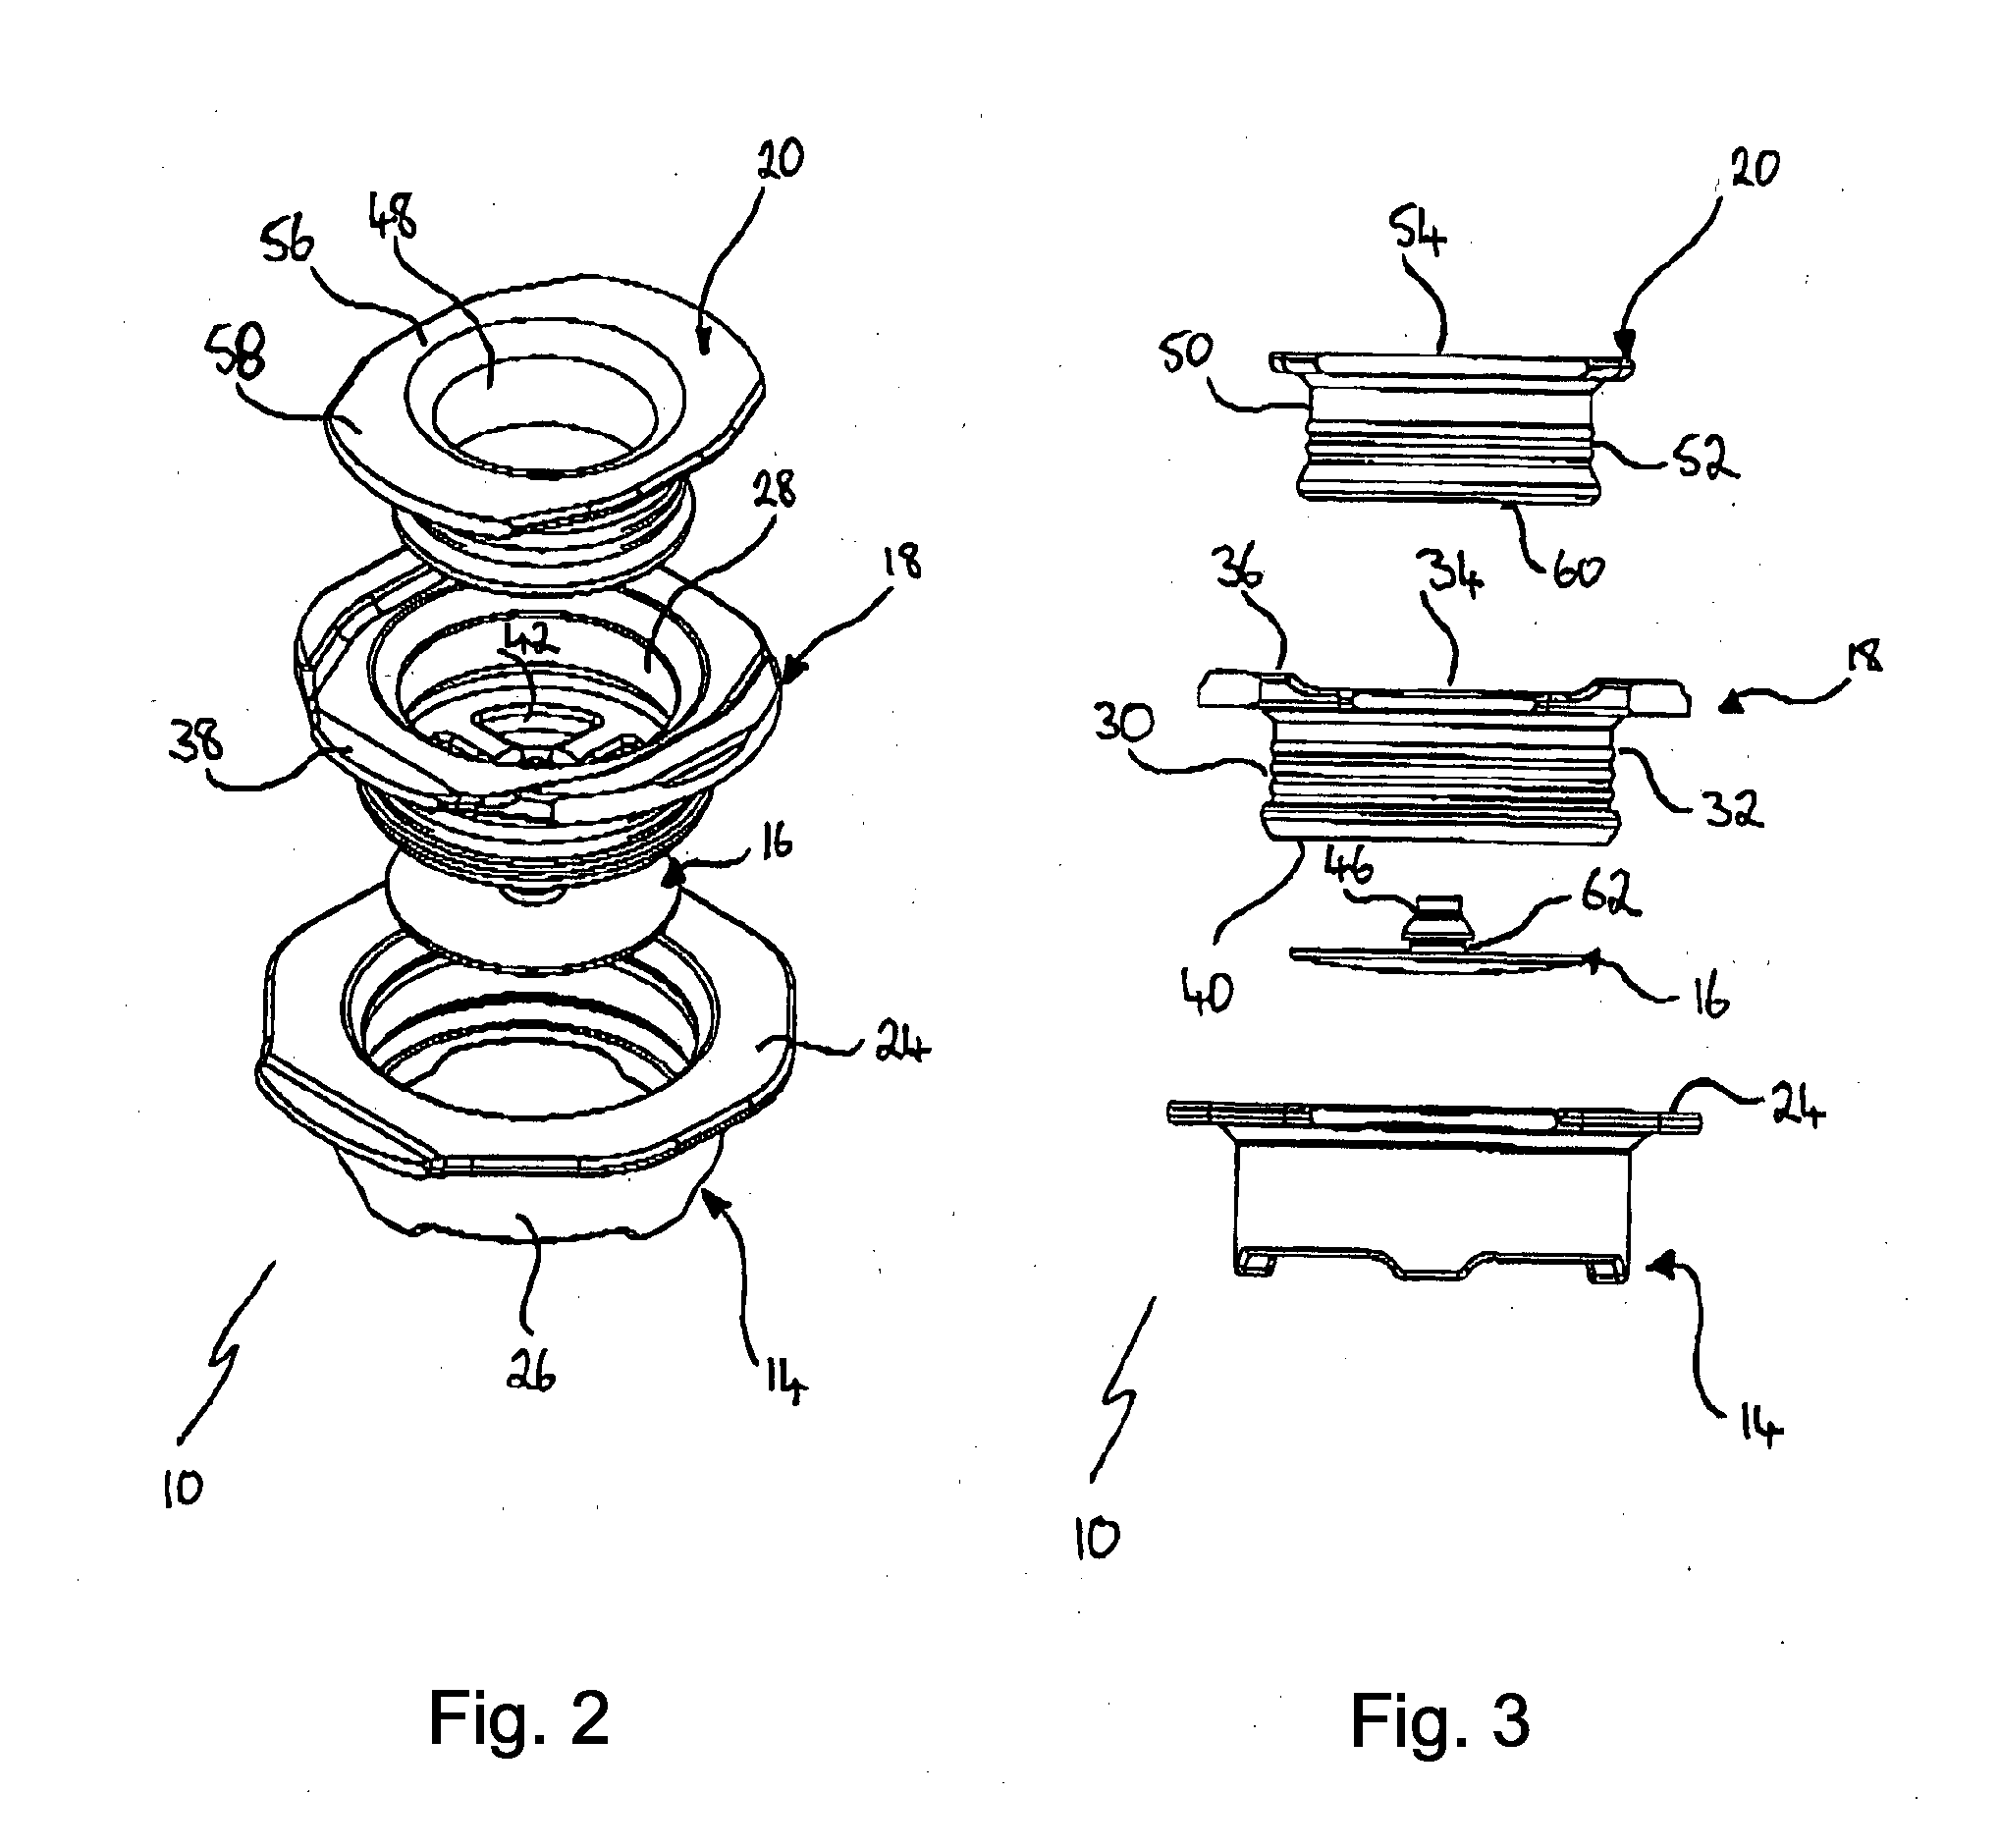 Valve for inflatable devices